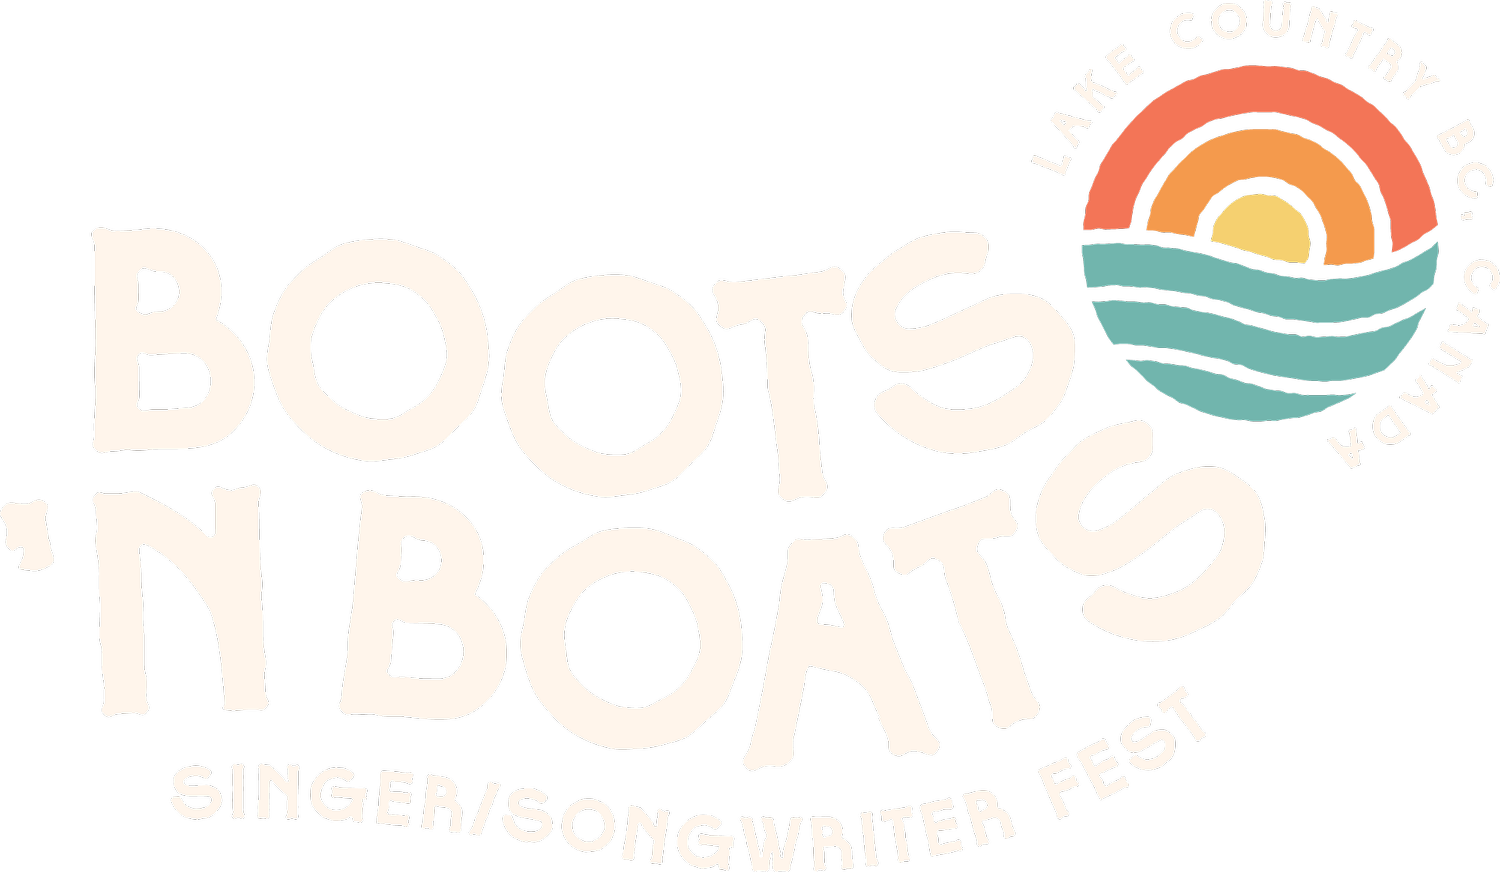 Boots &#39;n Boats Singer/Songwriter Fest | Lake Country BC, Canada